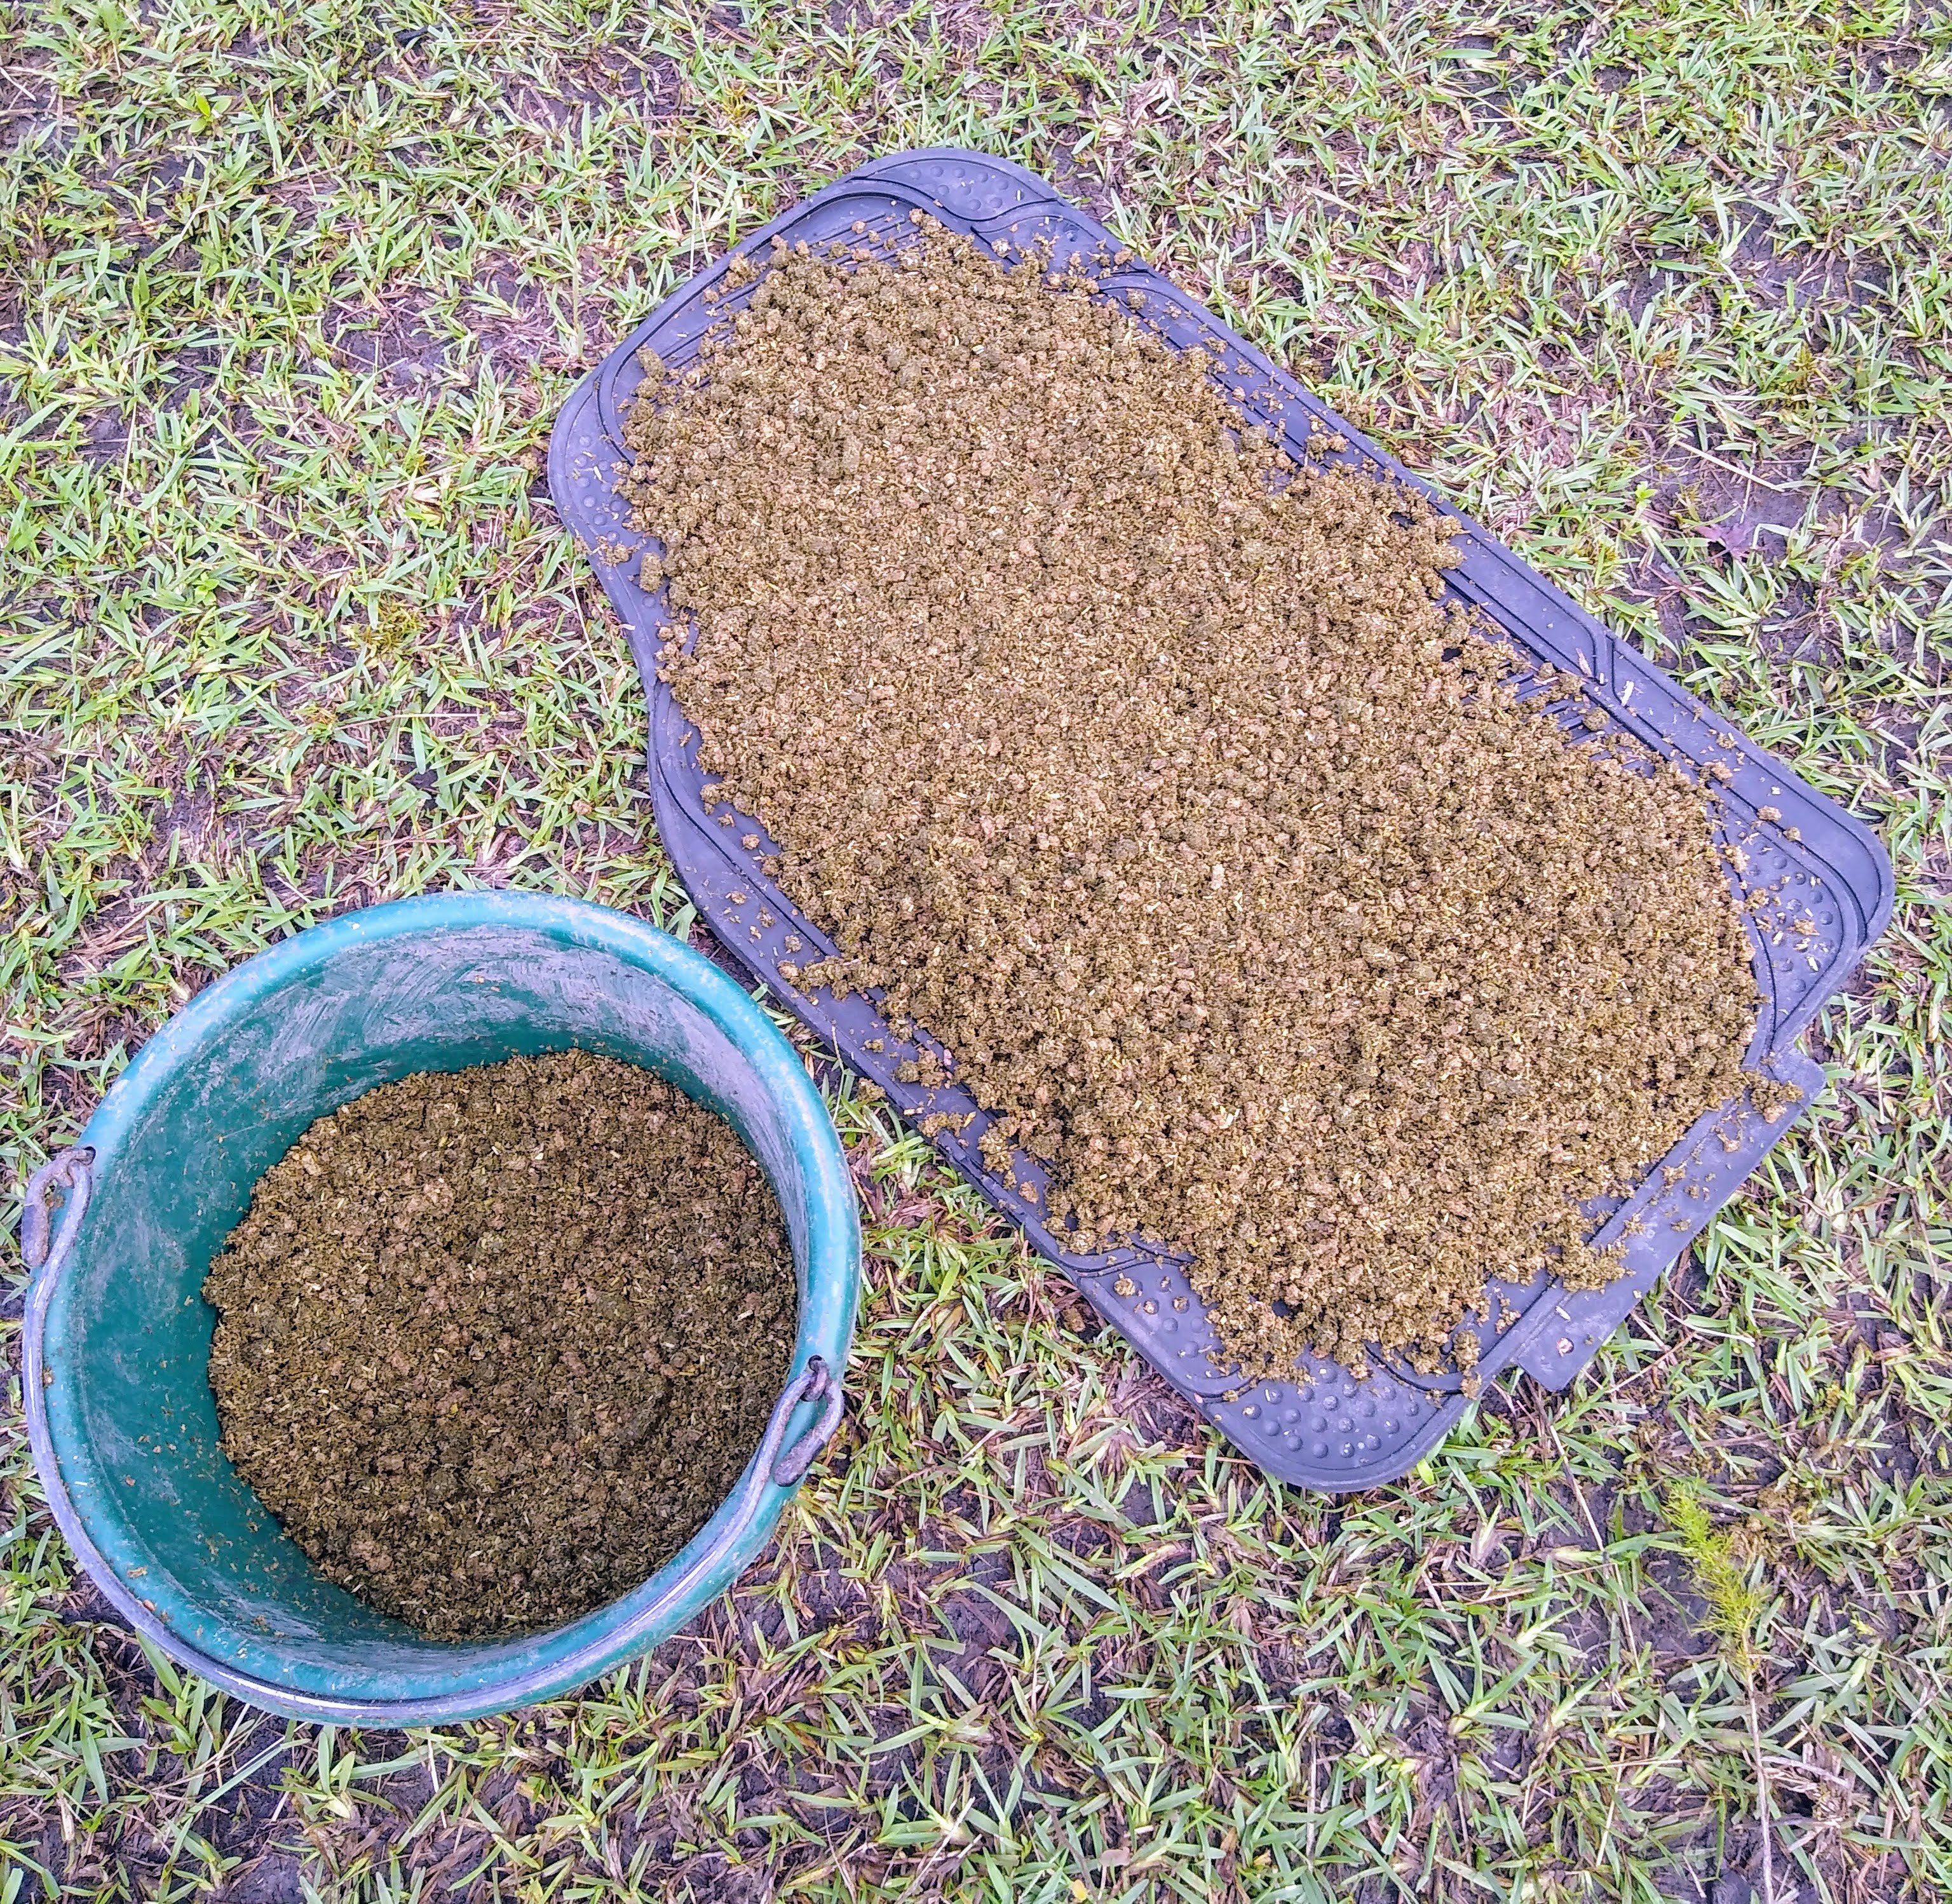 A green bucket of horse feed is on the left. The slow feeder mat for horses is on the right with a serving of horse feed.